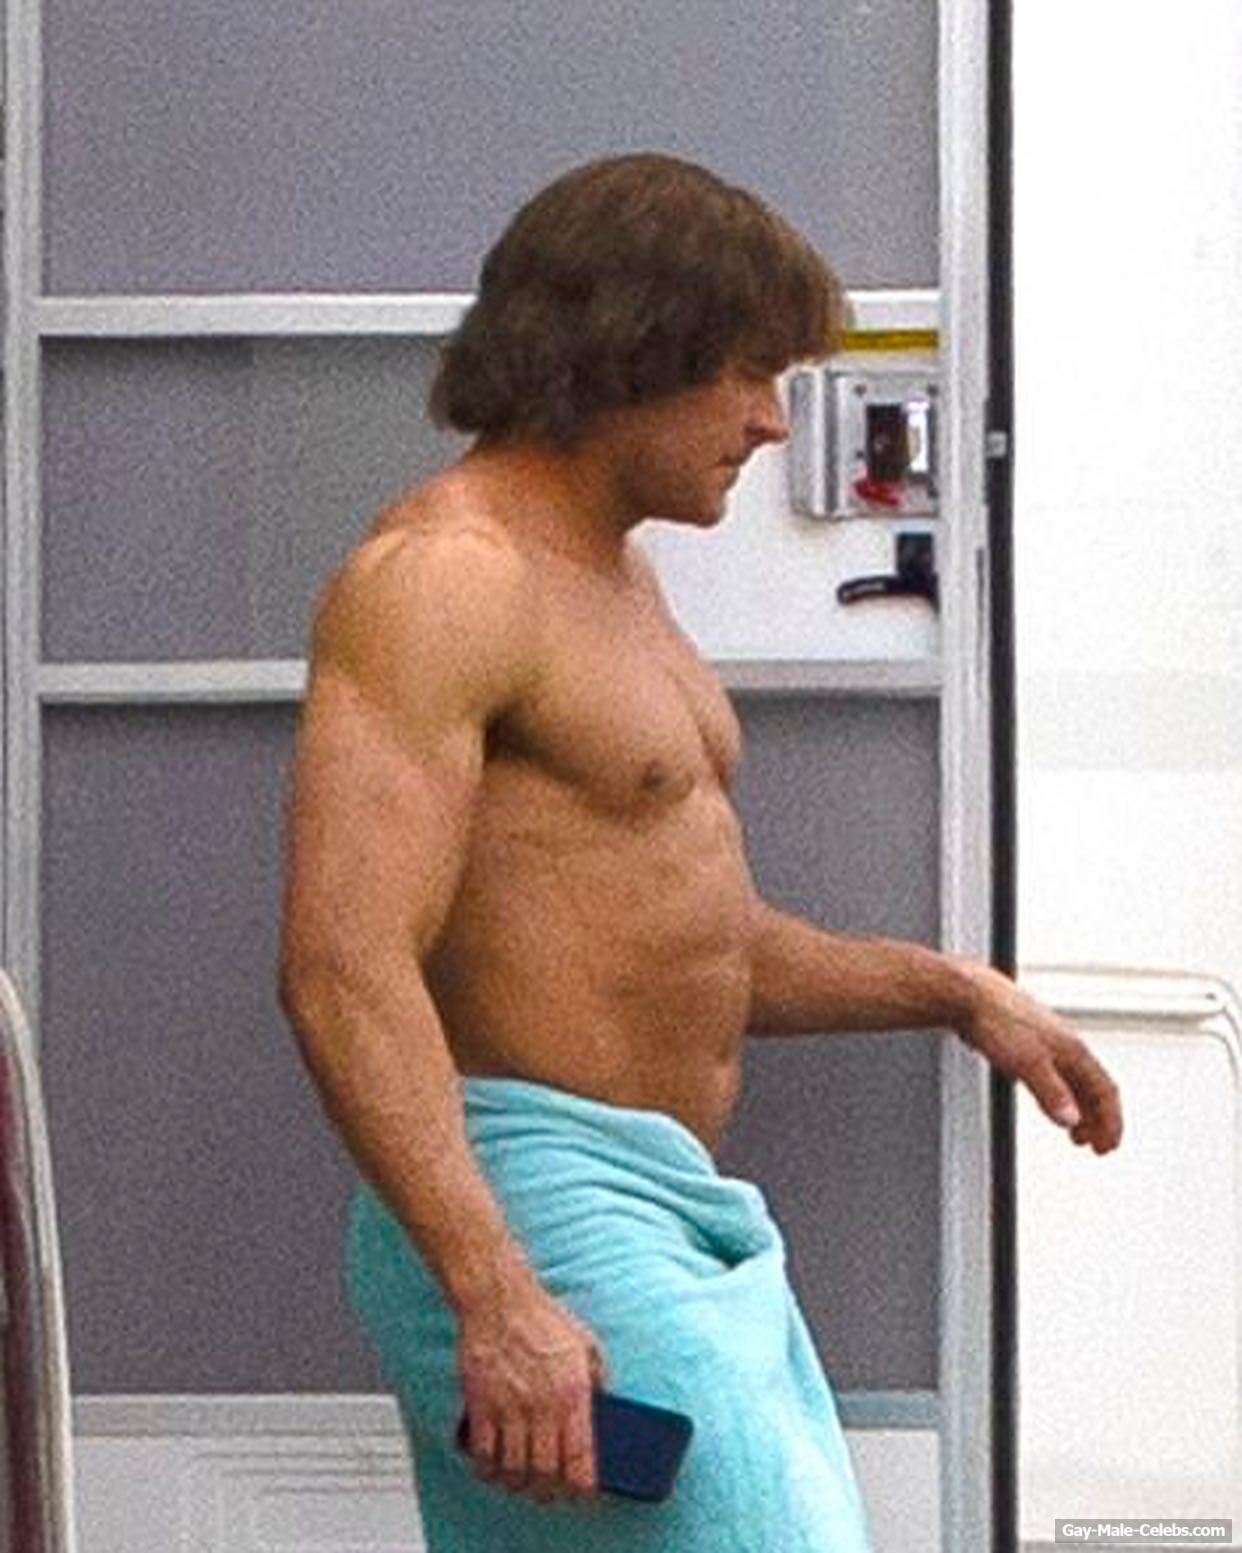 Zac Efron Shirtless And Muscle Body Photos